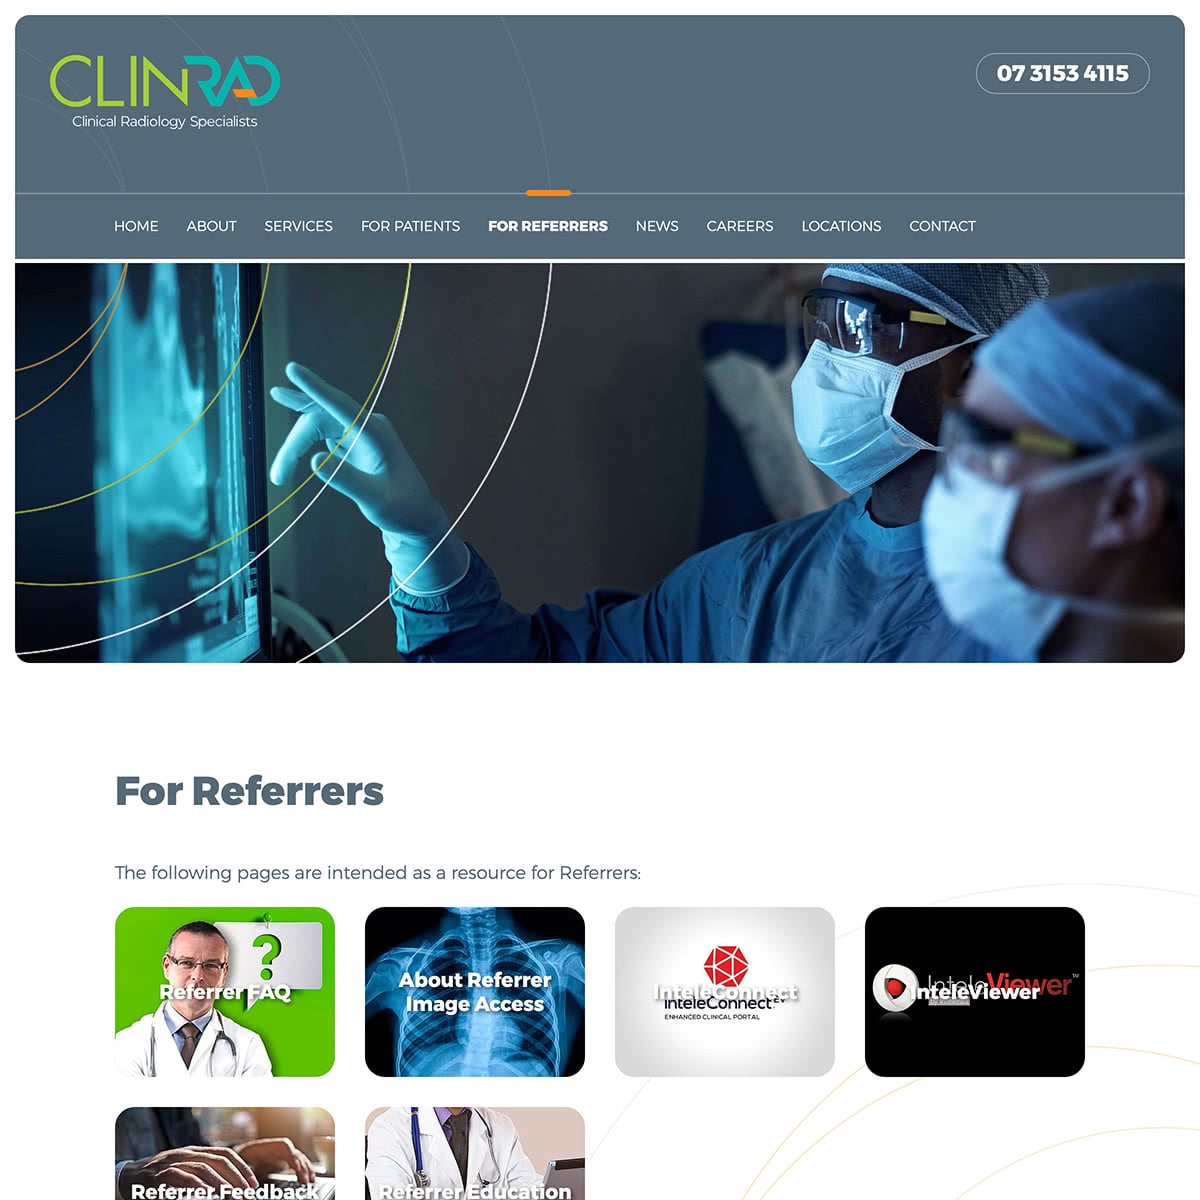 ClinRad - For Referrers Index